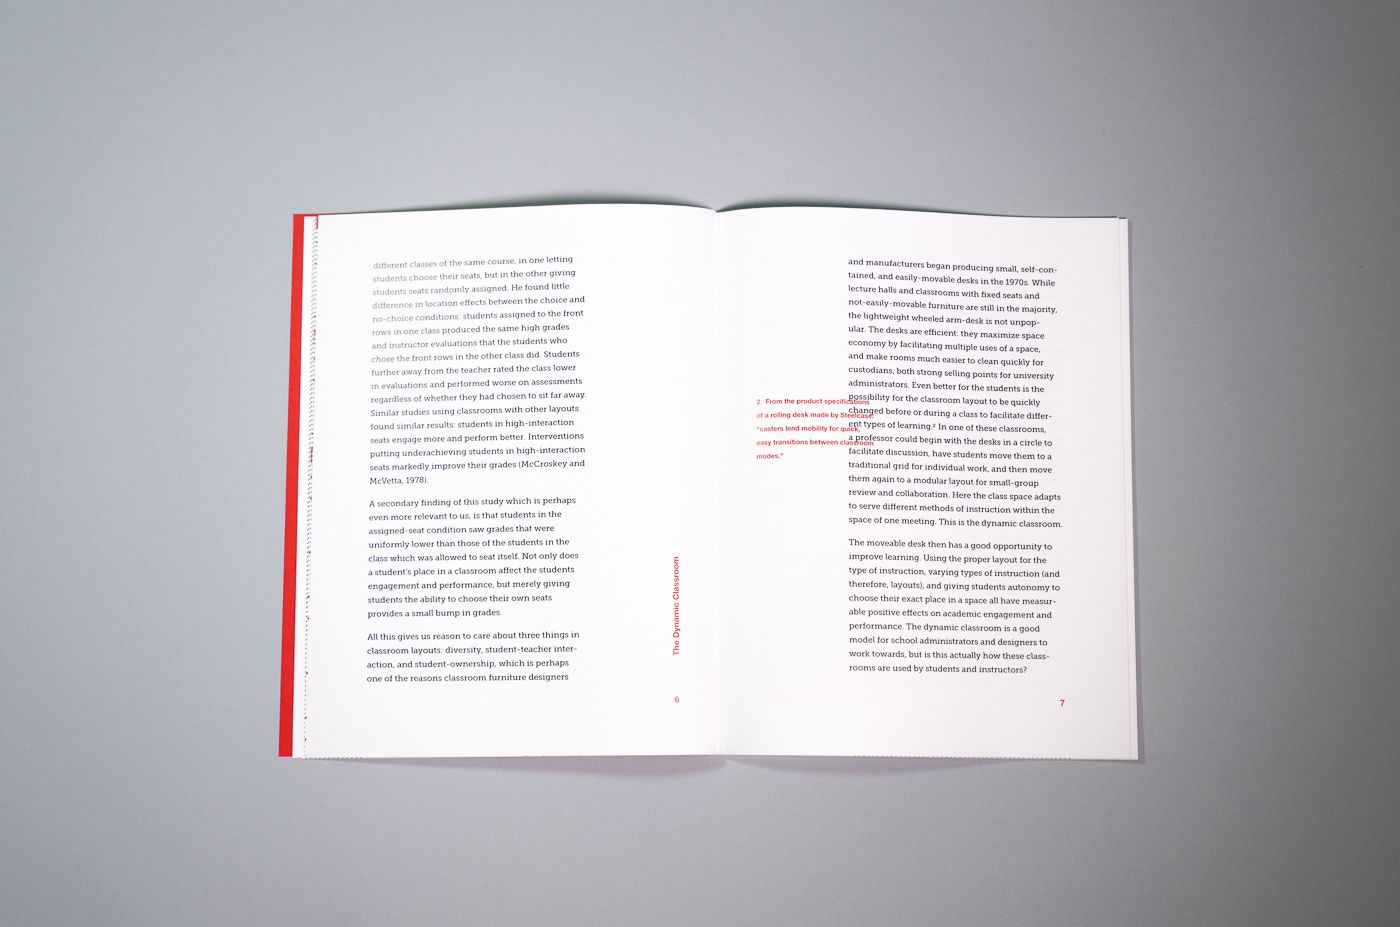 A text spread from The Dynamic Classroom. Footnotes are printed in red in the interior margins.